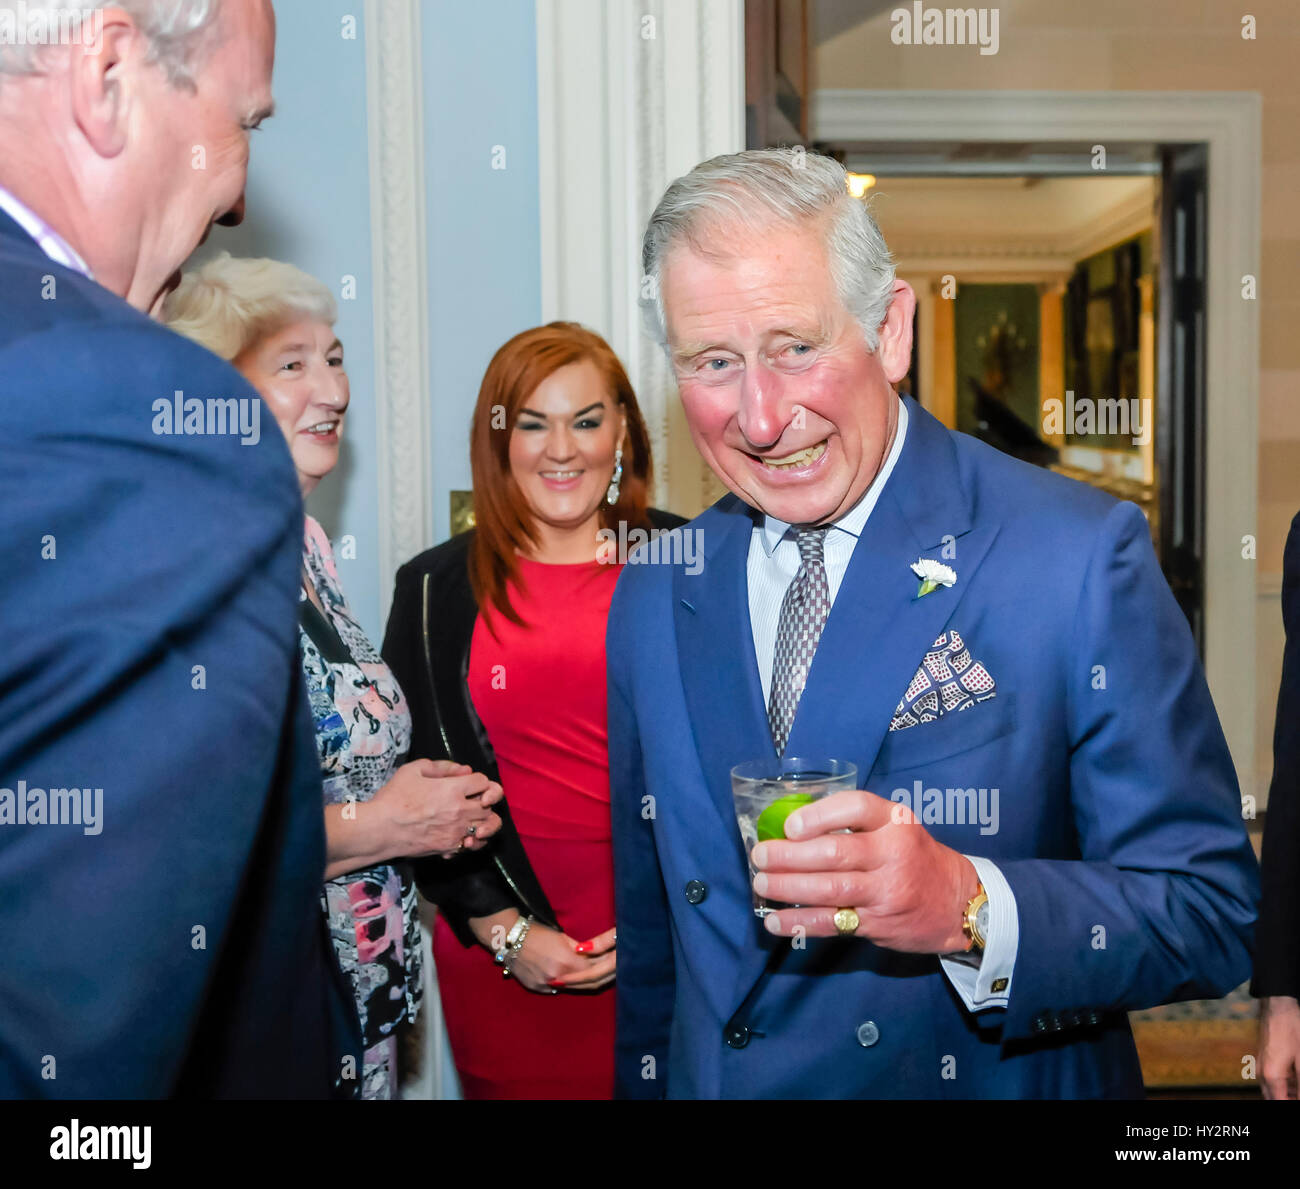 HILLSBOROUGH, NORTHERN IRELAND. 24 MAY 2016: HRH Prince Charles, the Prince of Wales, shares a joke with guests in Hillsborough Palace over a gin and tonic. Stock Photo